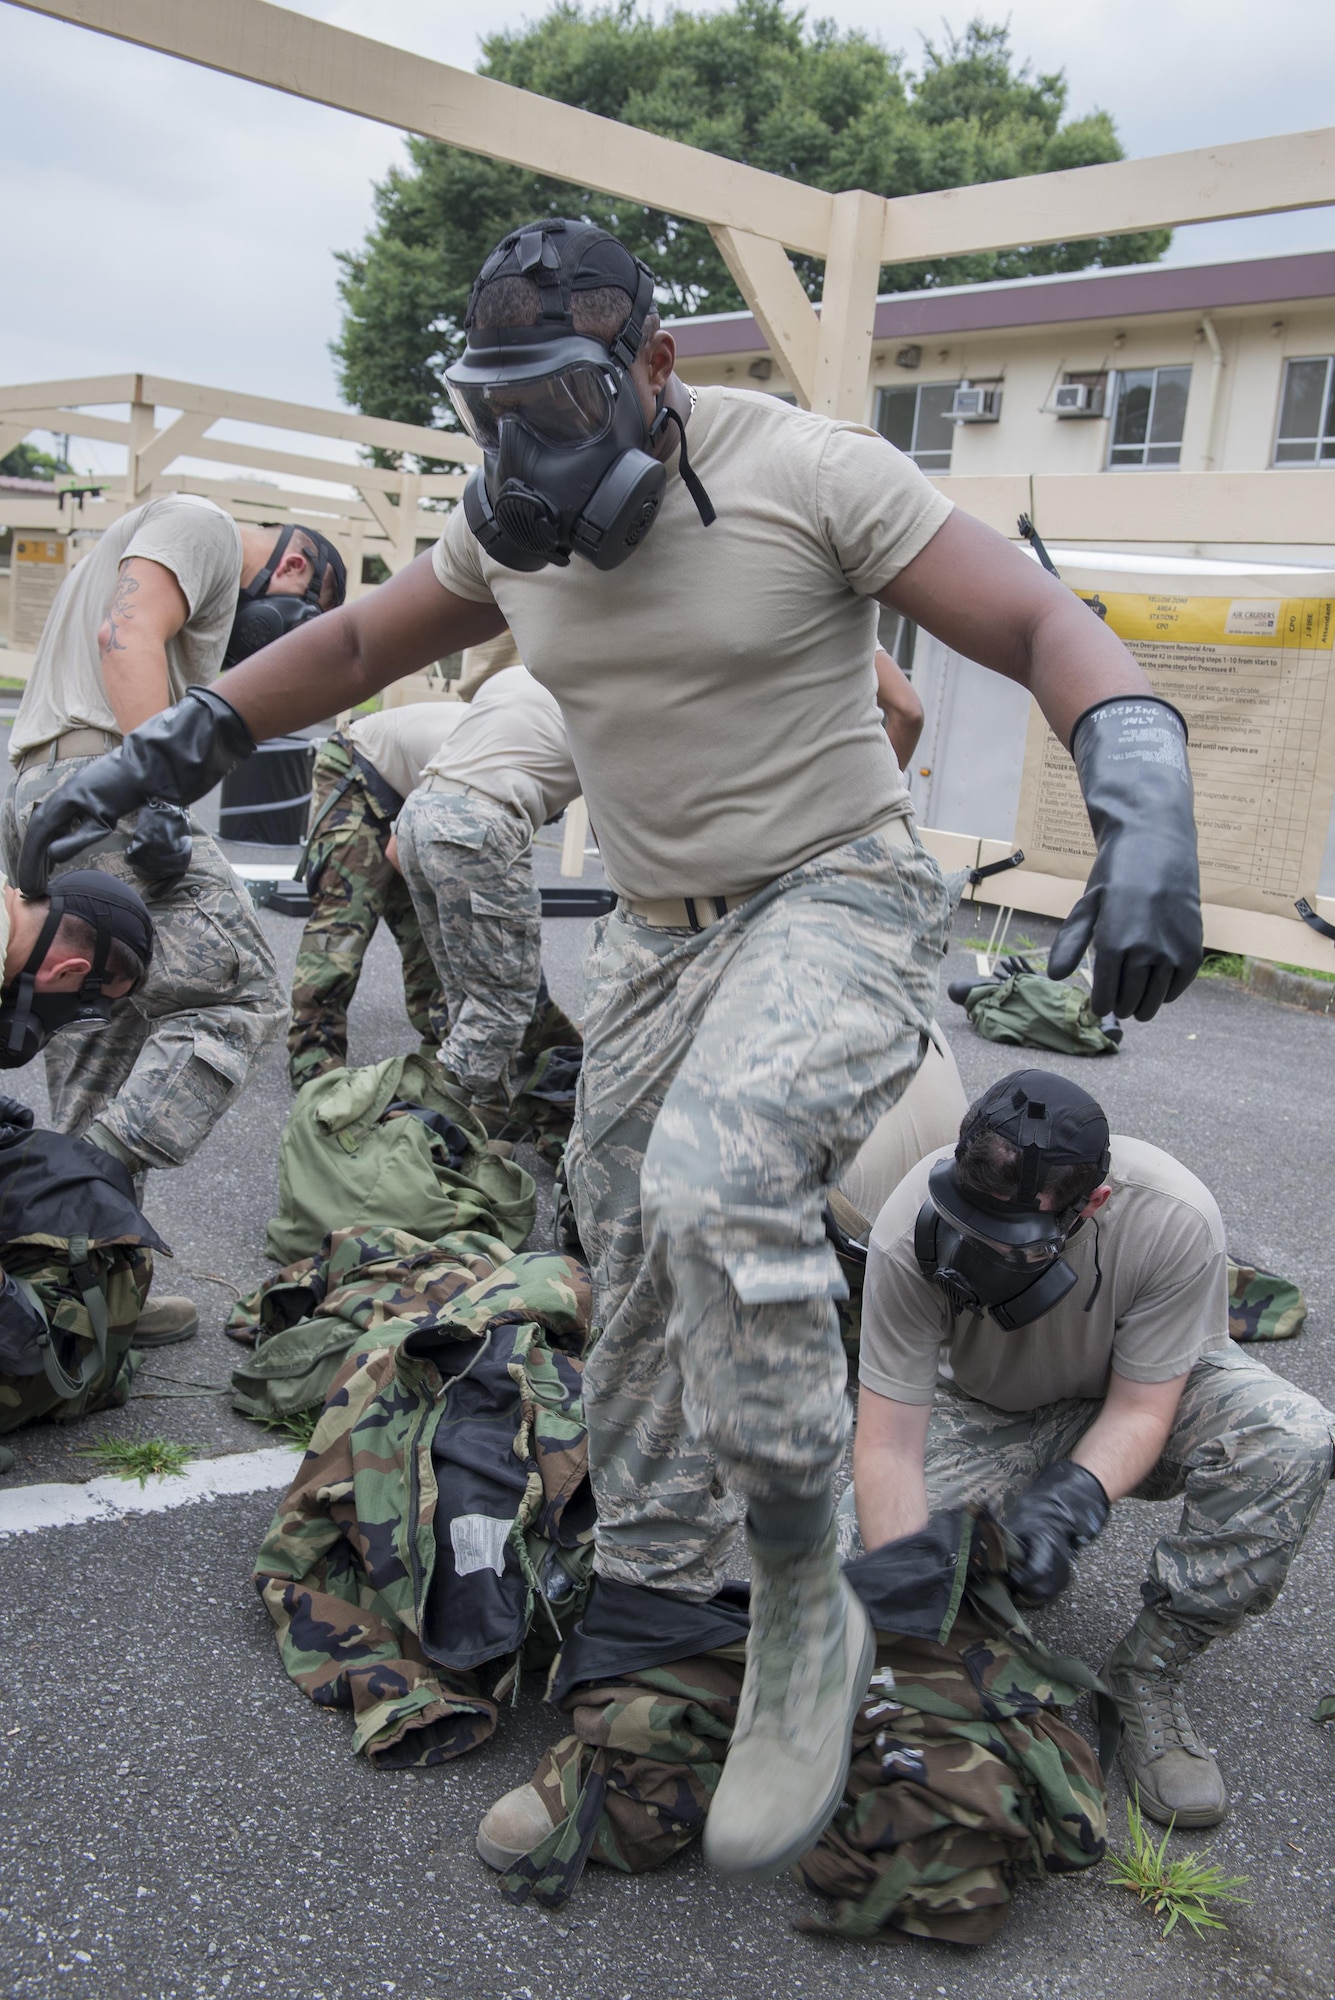 2nd Lt. Marvis Joseph, 374th Civil Engineer Squadron chief of asset optimization, steps out of his chemical protection gear during a Chemical, Biological, Radiological, Nuclear and Explosives defense class at the Camp Warlord training ground at Yokota Air Base, Japan, Aug. 10, 2016. The Airmen practiced CBRNE response, decontamination procedures and how to properly shelter-in-place. (U.S. Air Force photo by Senior Airman David C. Danford/Released)